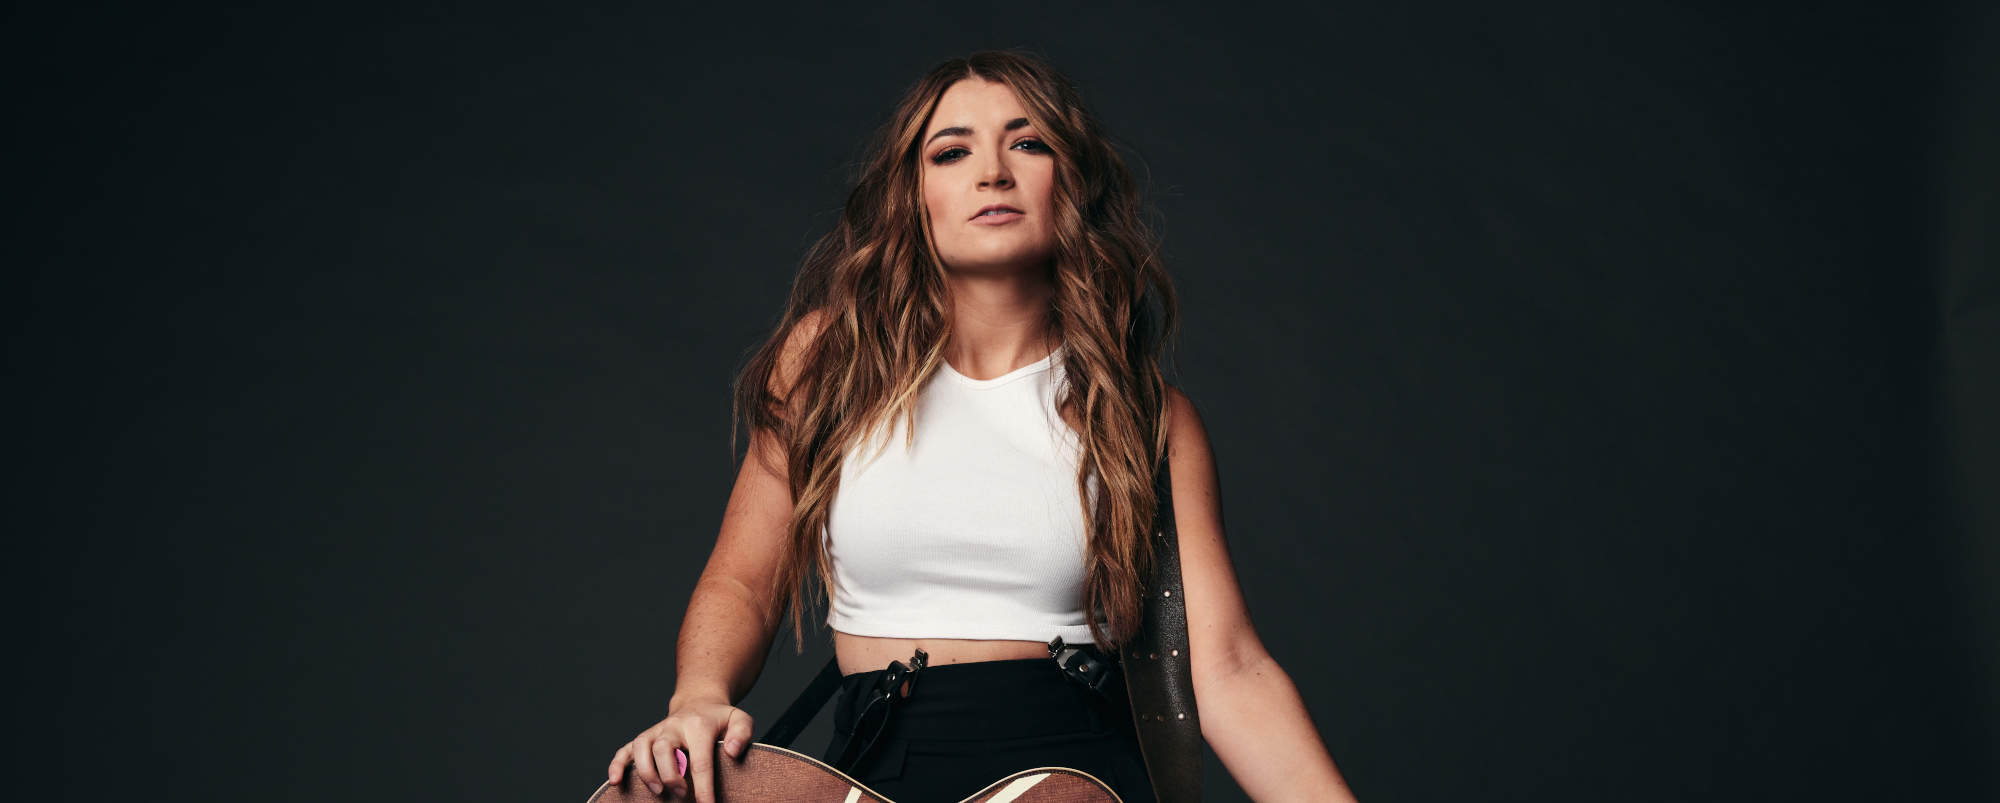 Tenille Townes Talks New Single, Touring & More on ‘The Zak Kuhn Show’